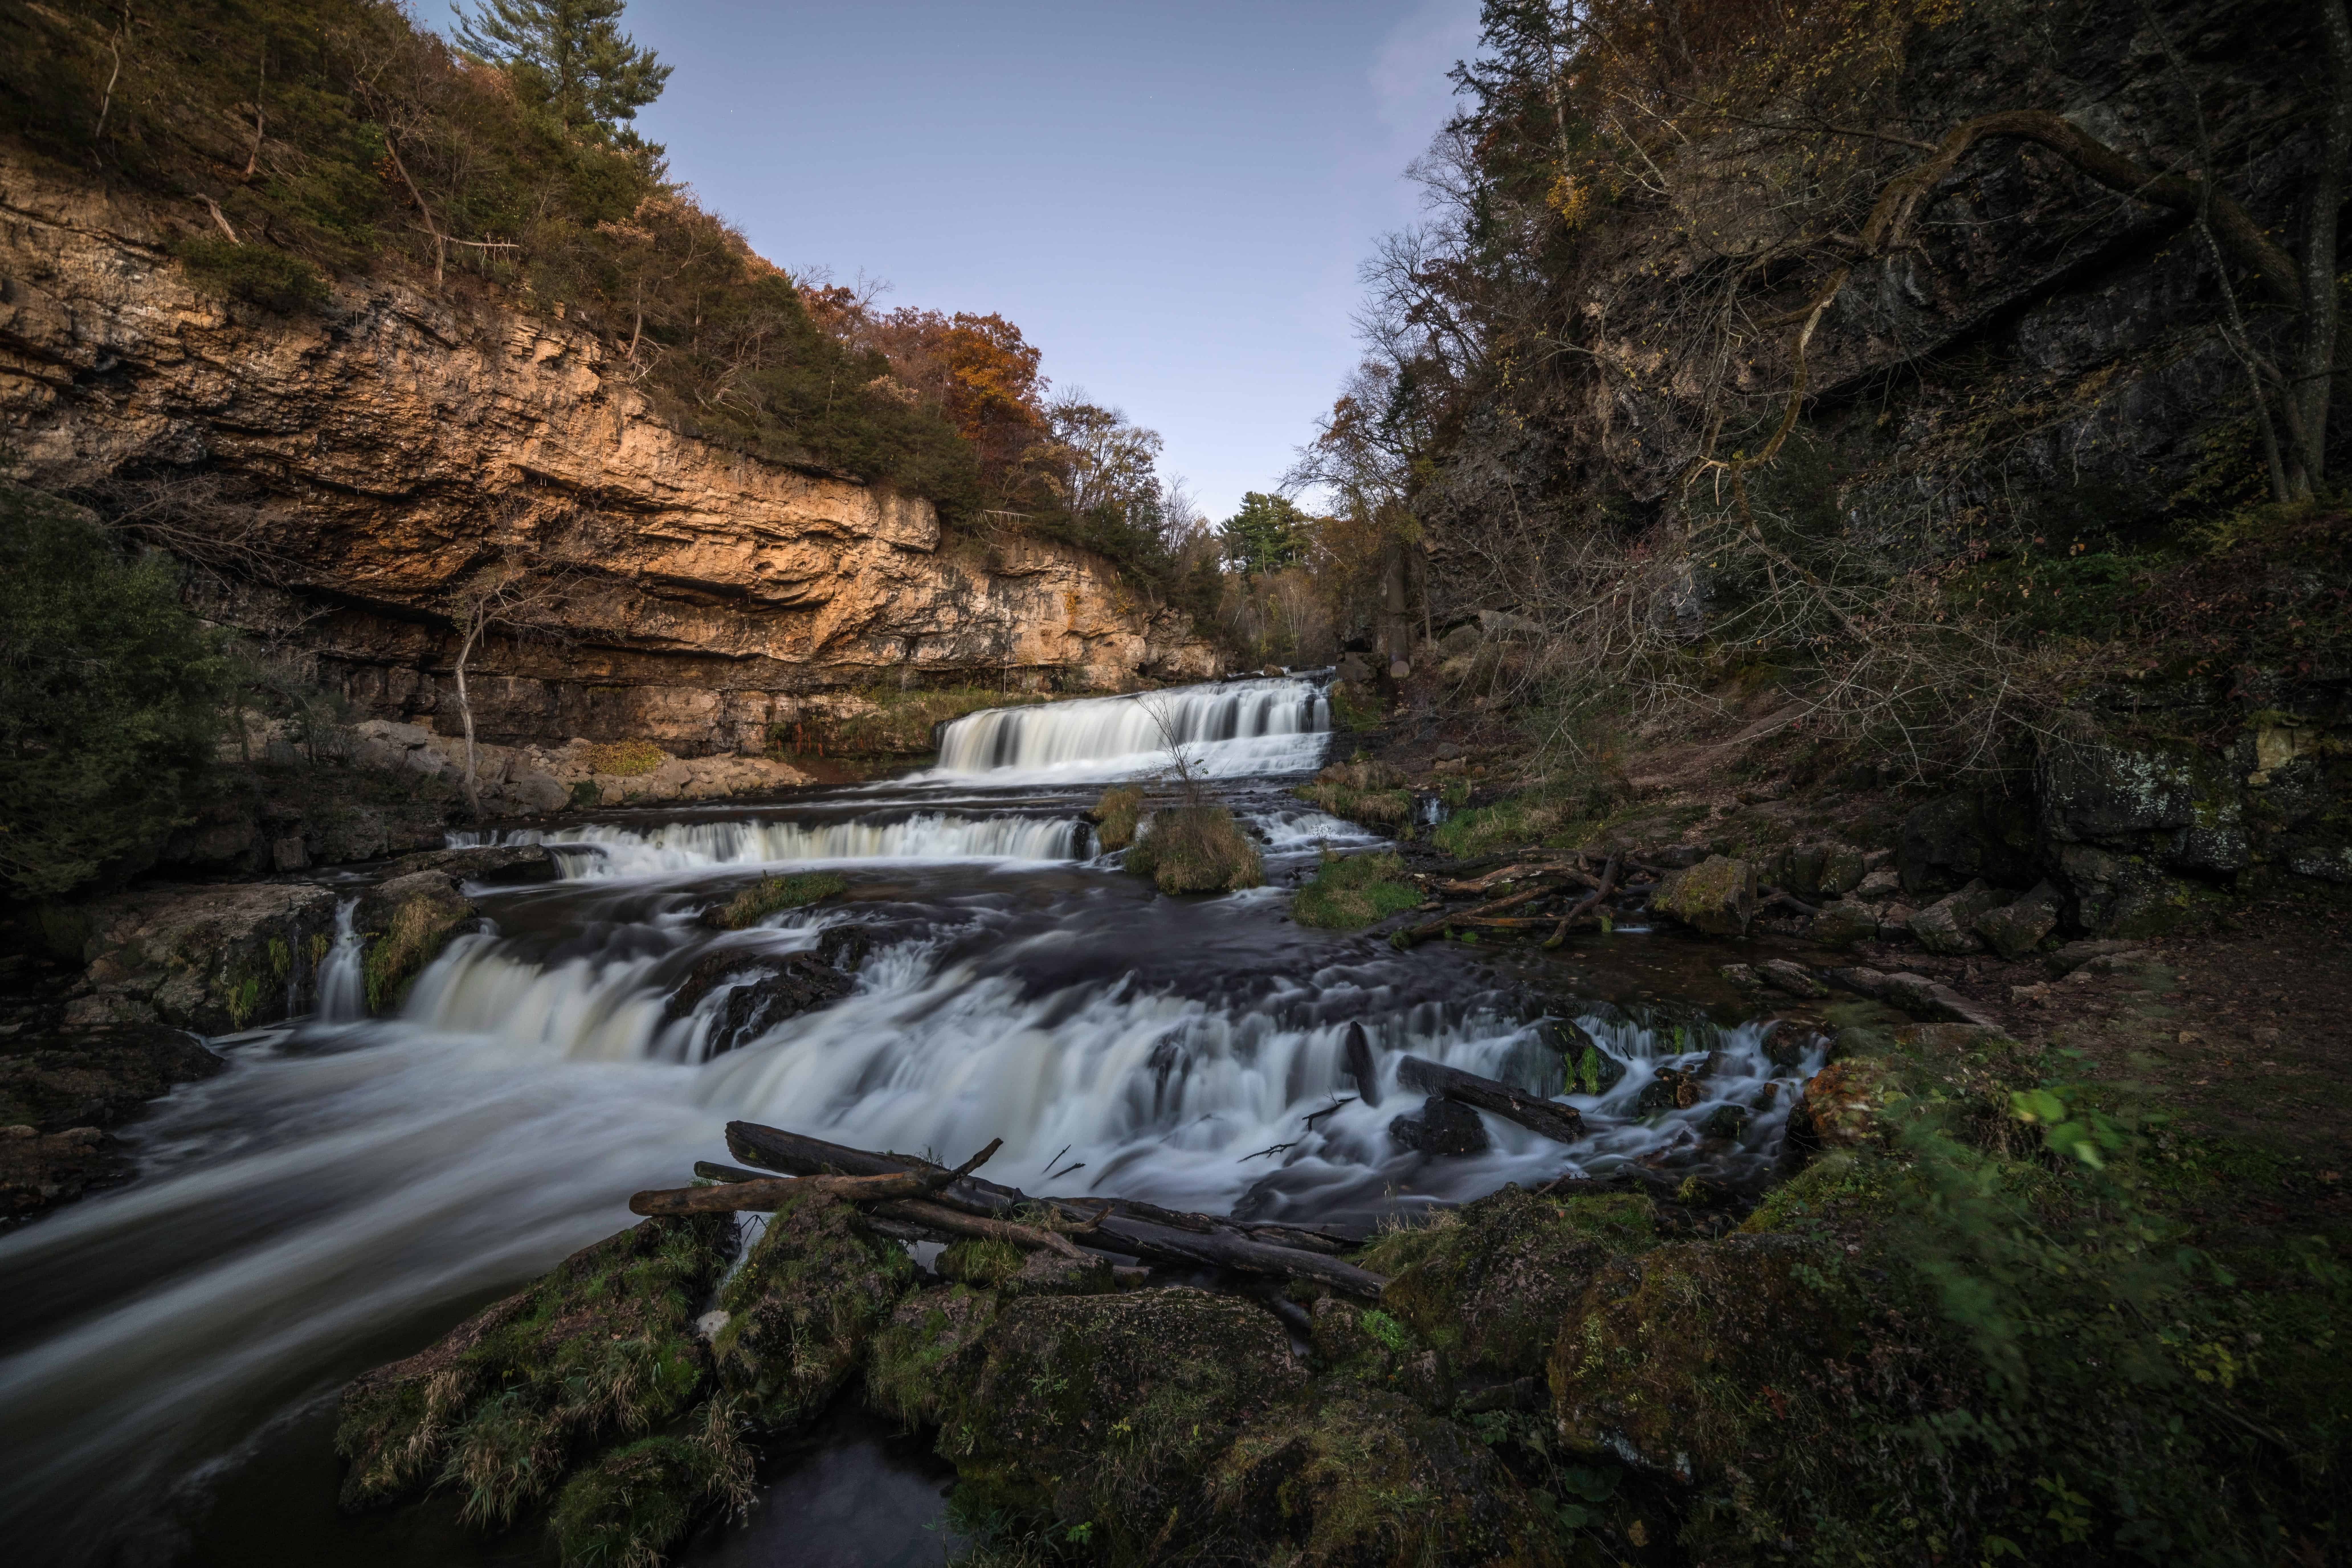 Willow River State Park has some great hikes near the Twin Cities, just across the Wisconsin border.